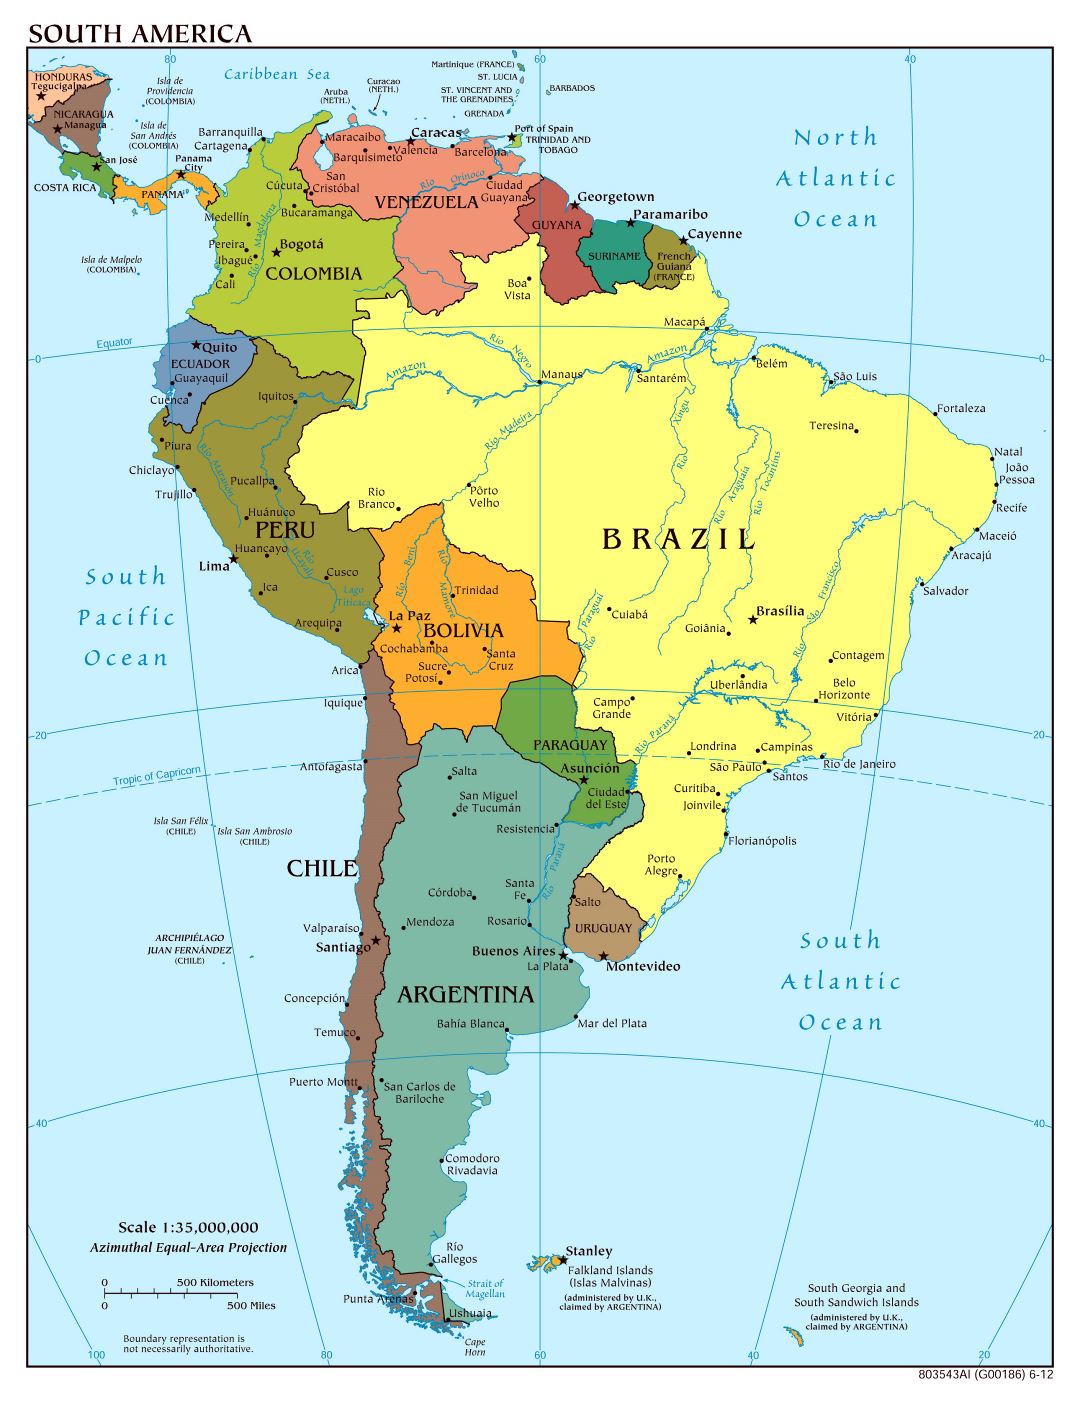 Large scale political map of South America with major cities and capitals - 2012